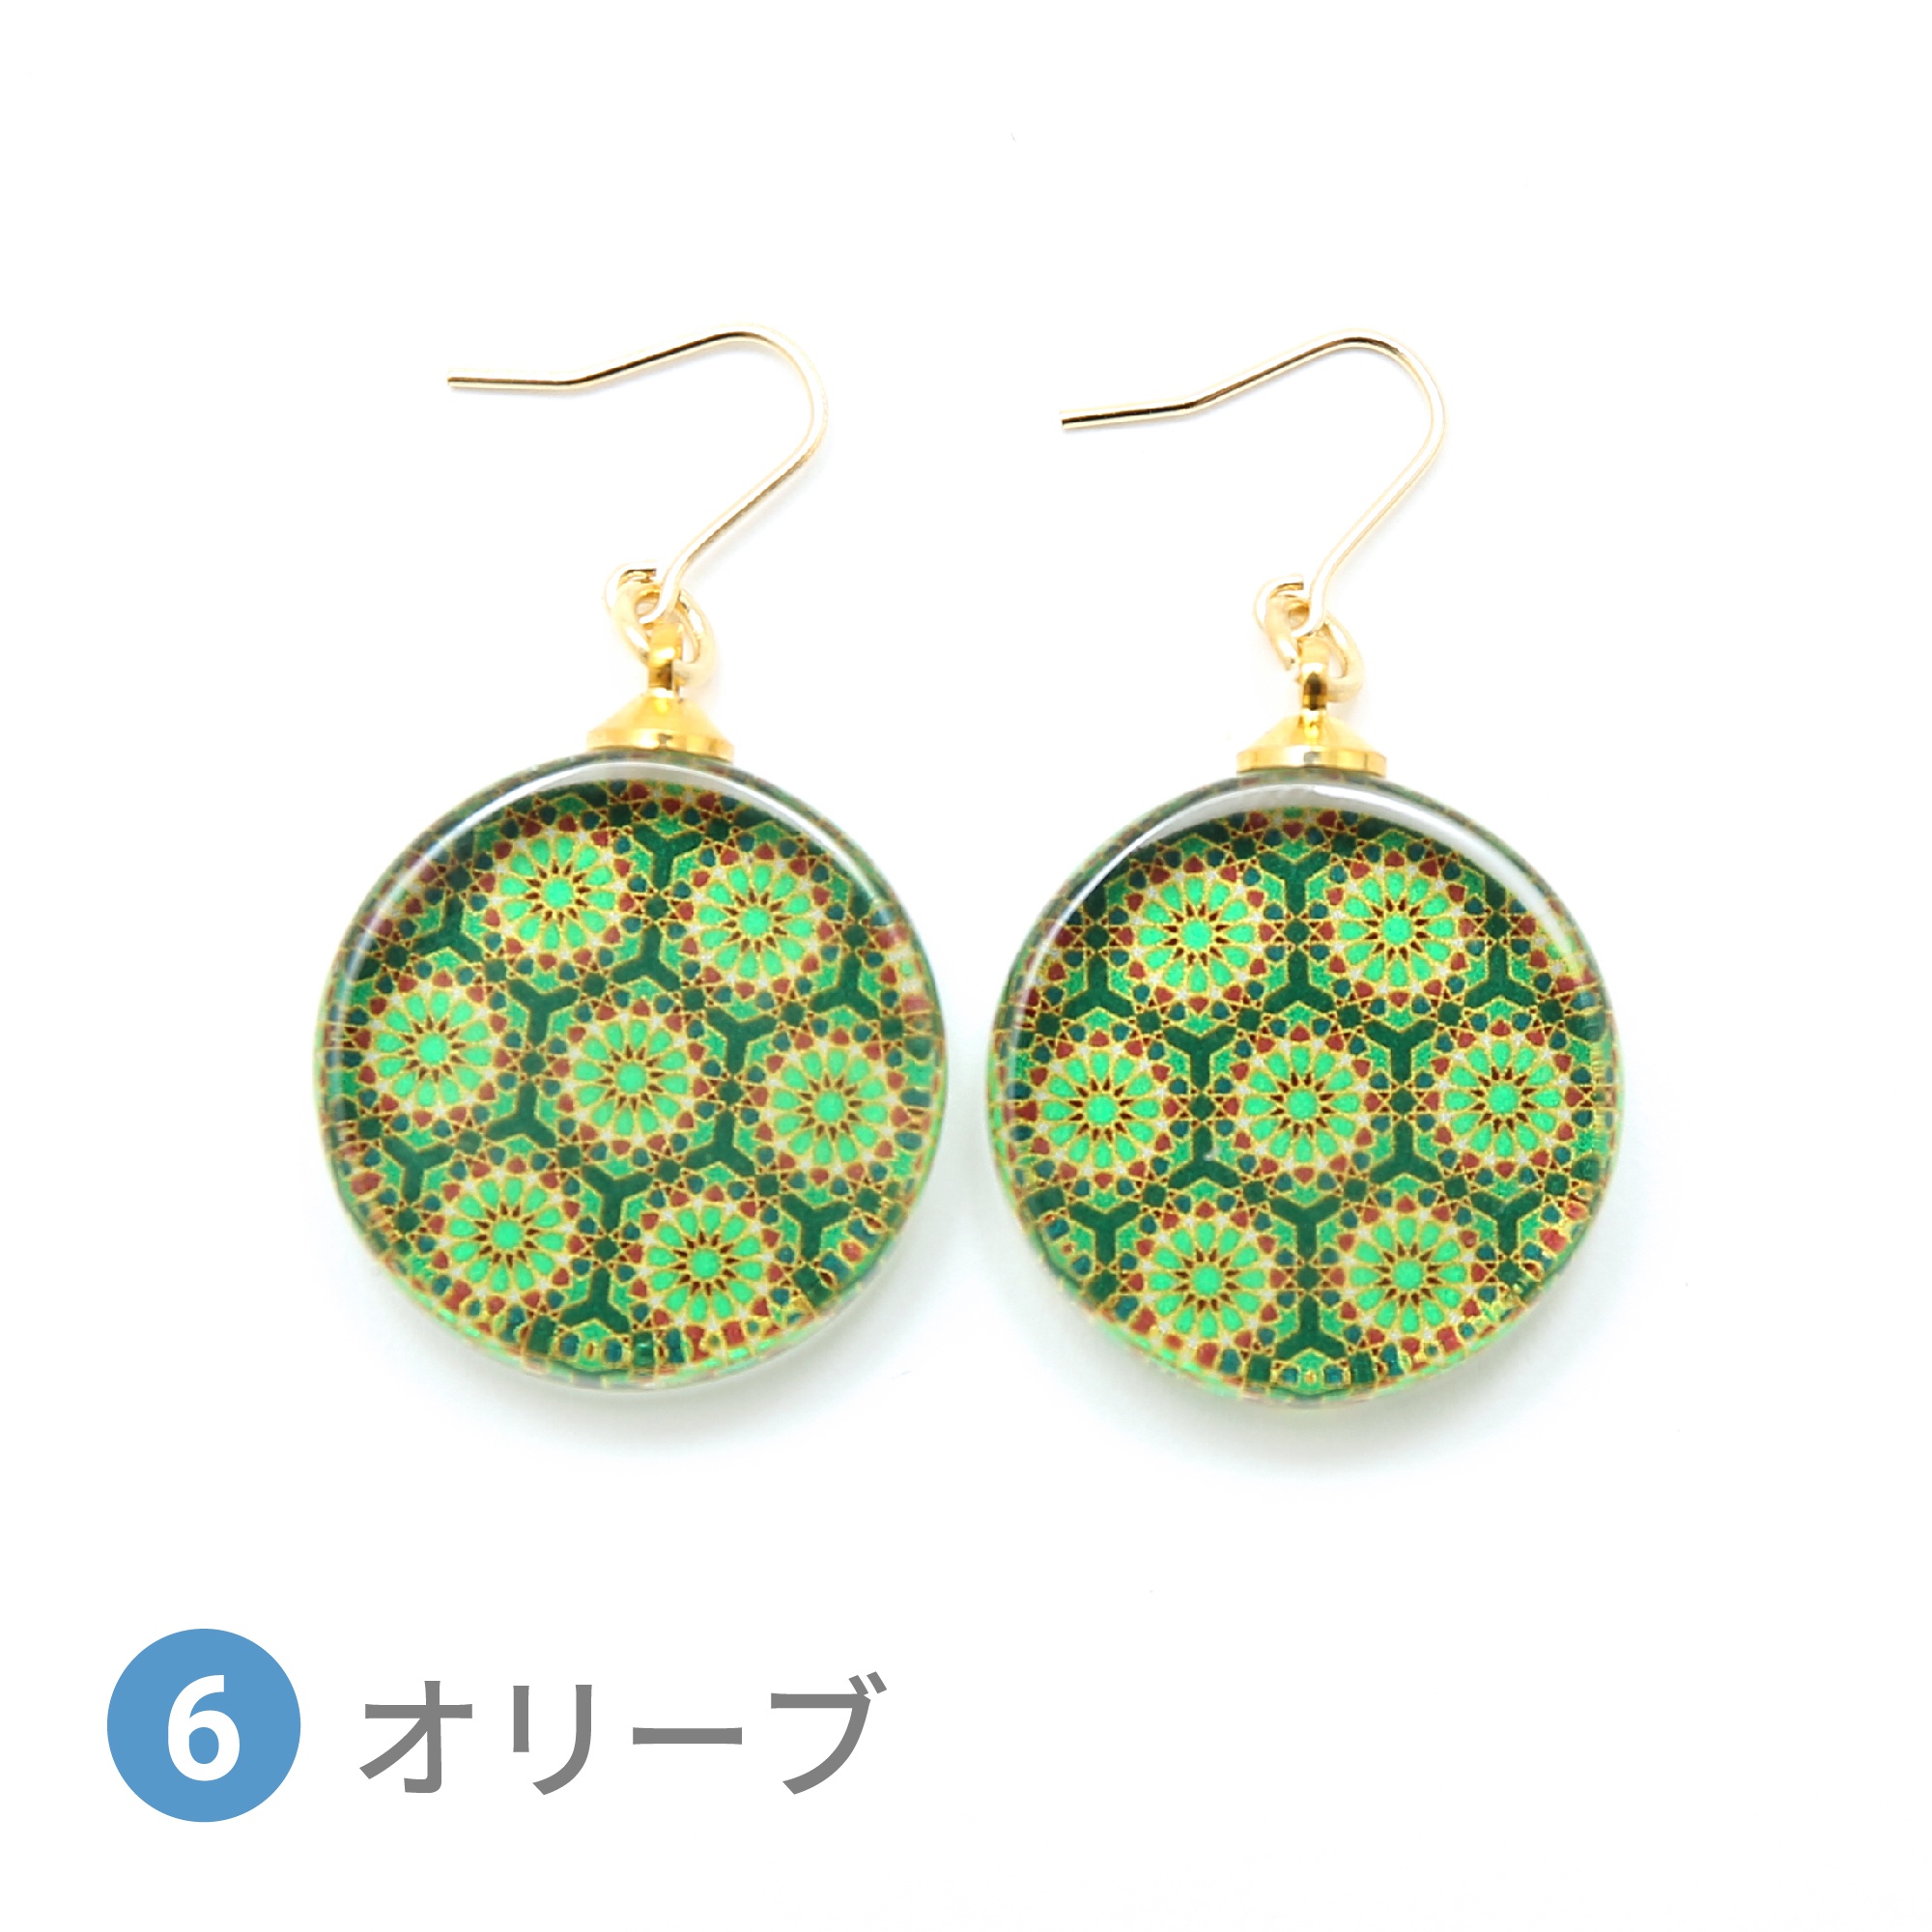 Glass accessories Pierced Earring ARABESQUE olive round shape